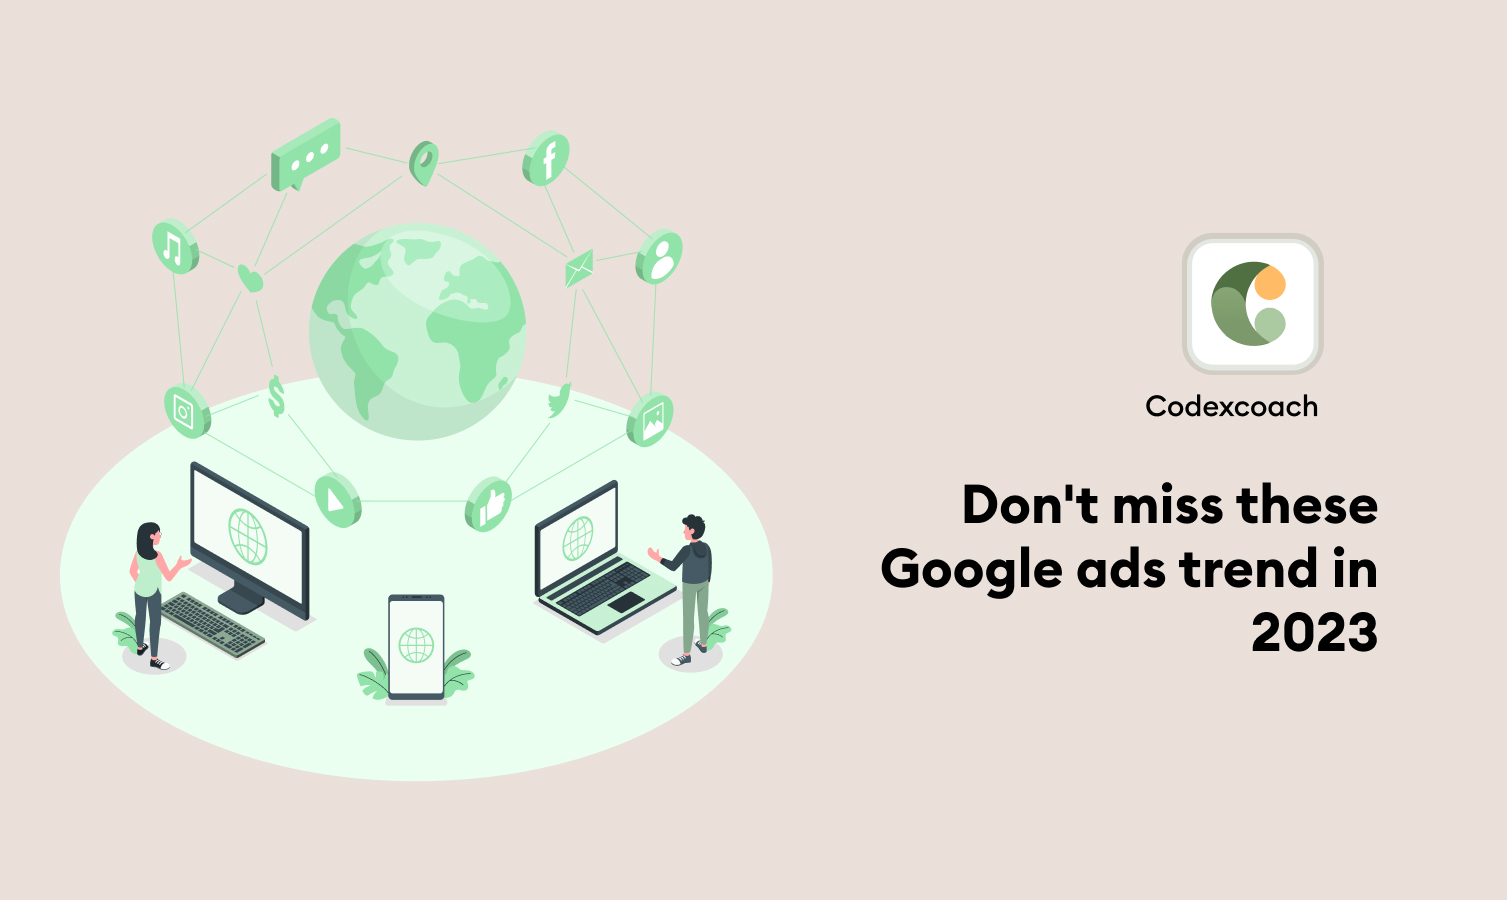 Don't miss these Google ads trend in 2023